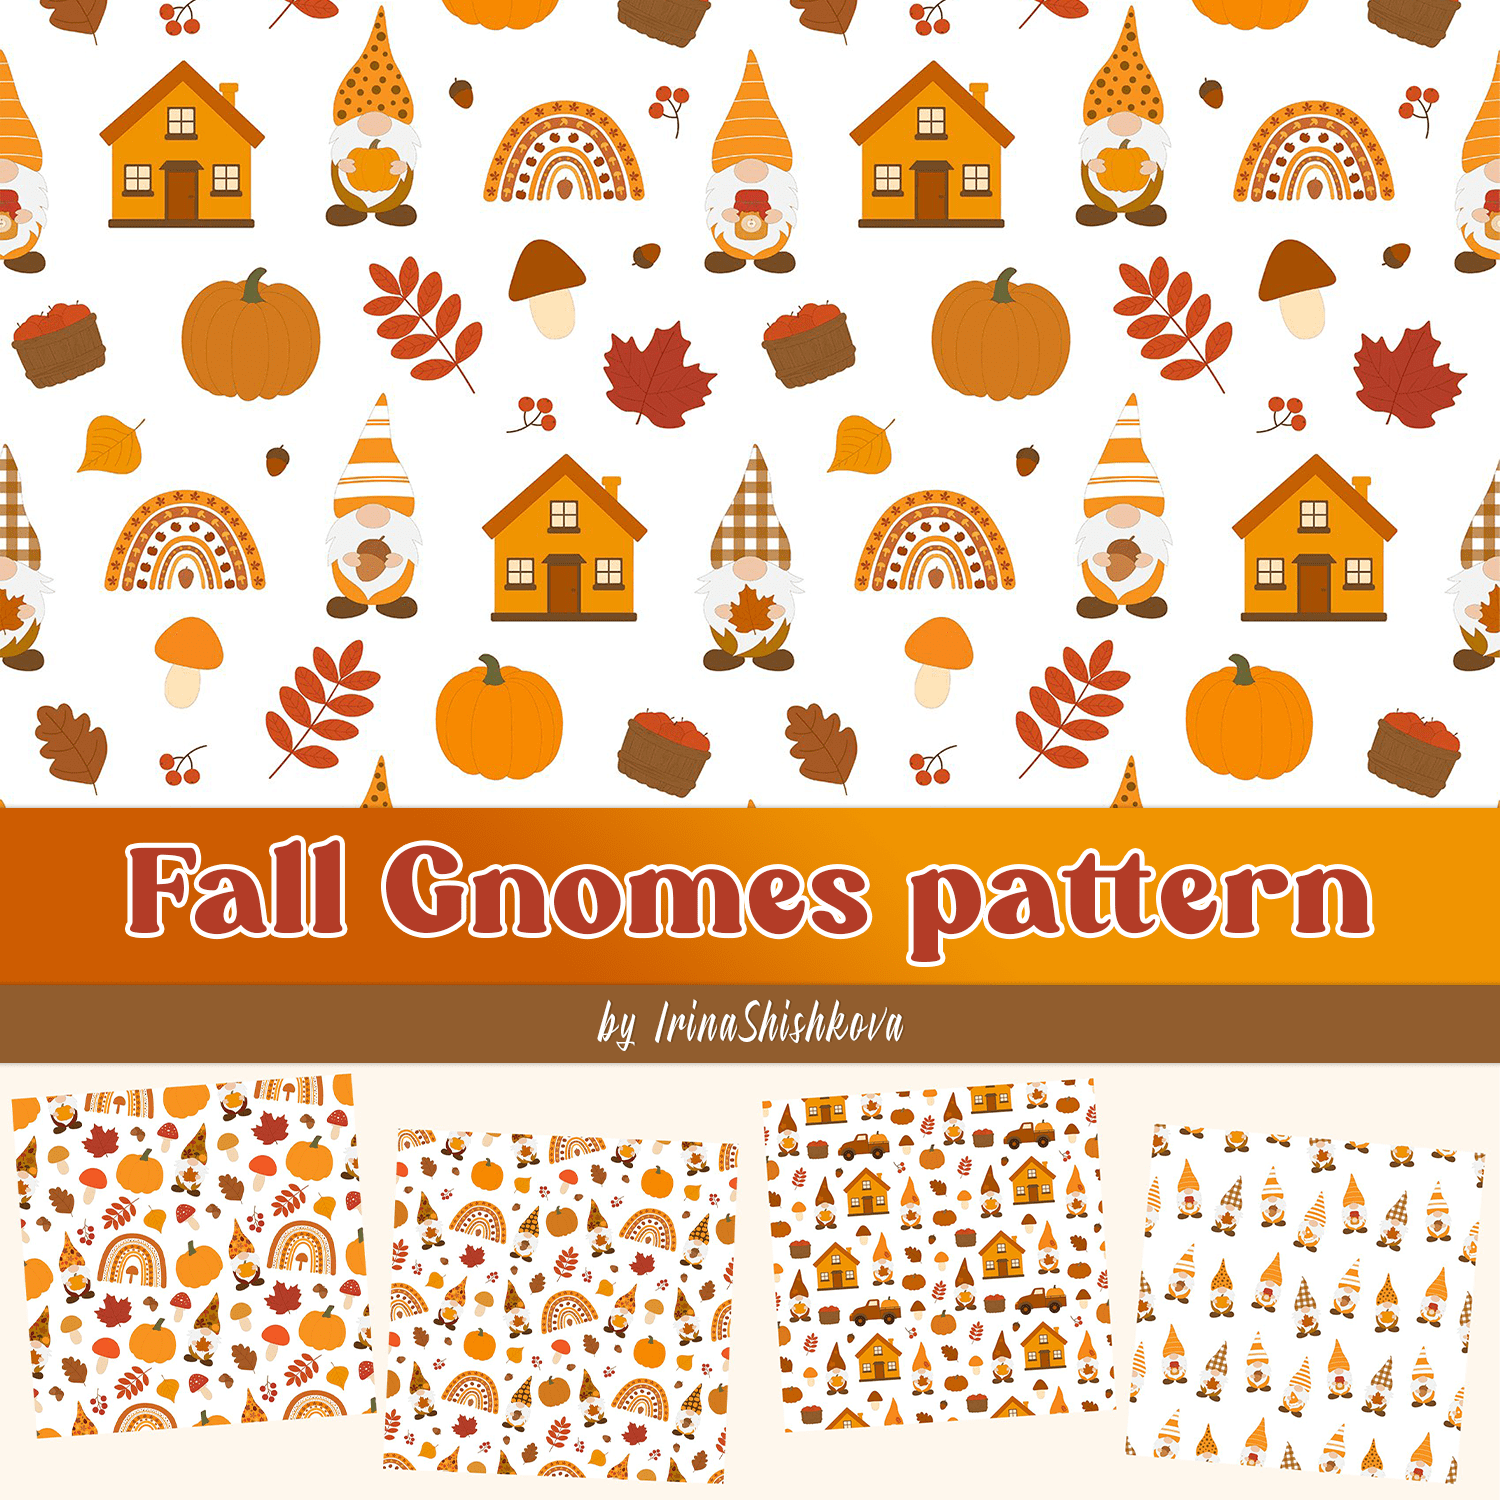 Gnomes pattern. Fall Gnomes pattern. cover.